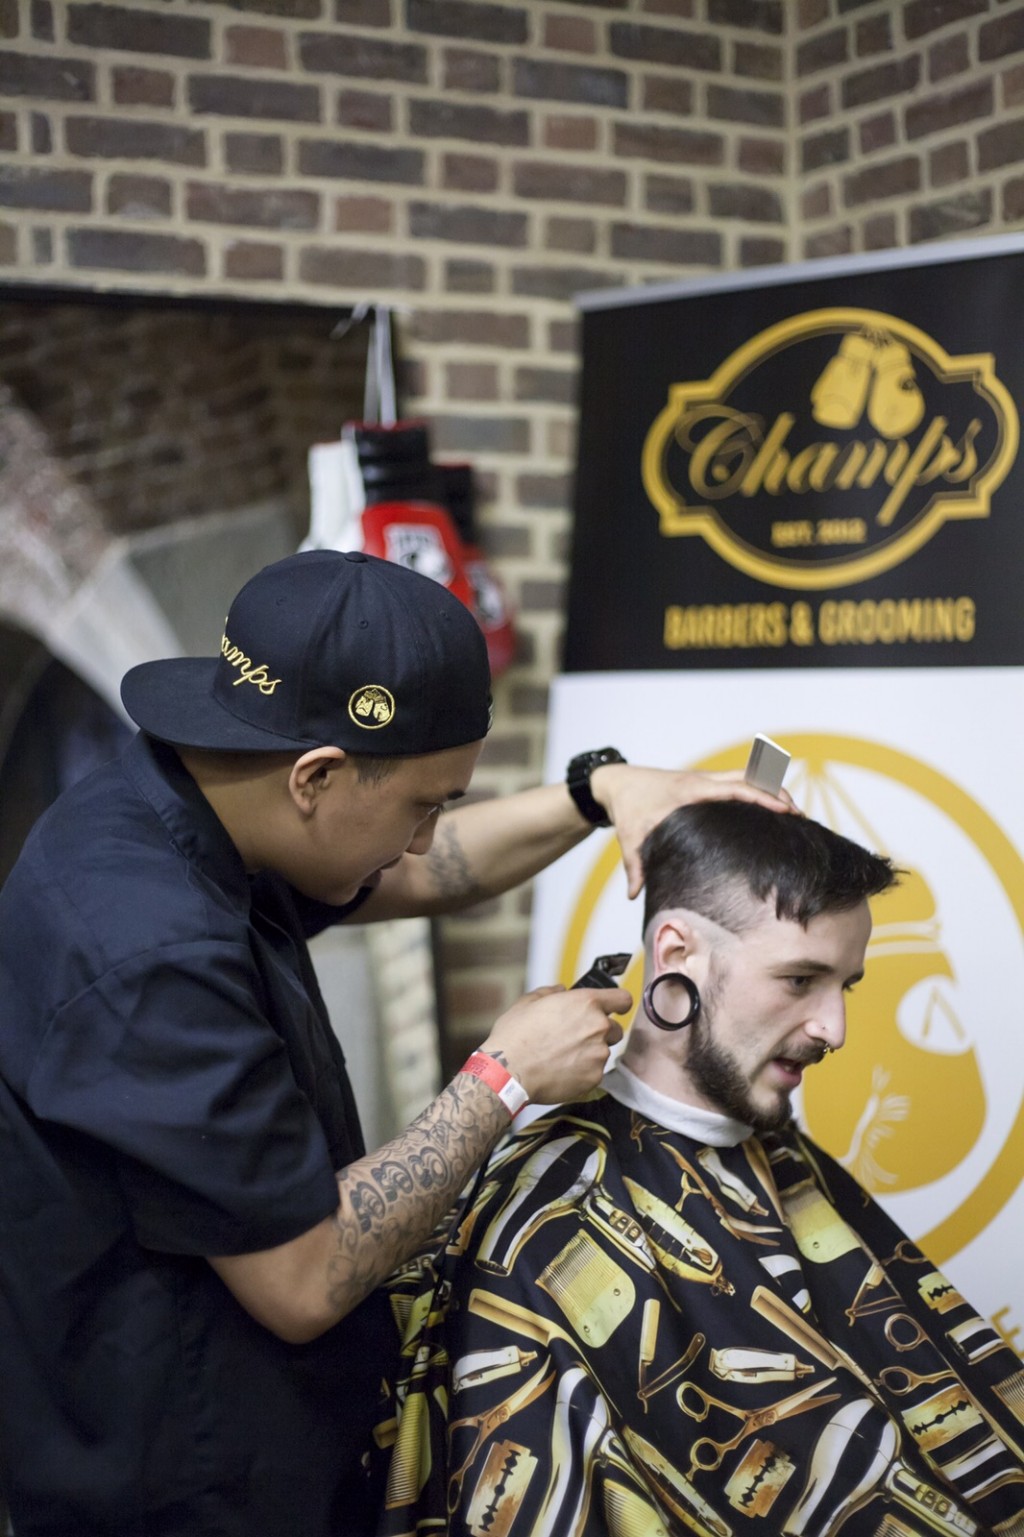 Troy Argones, master barber in Champs Barbers London.